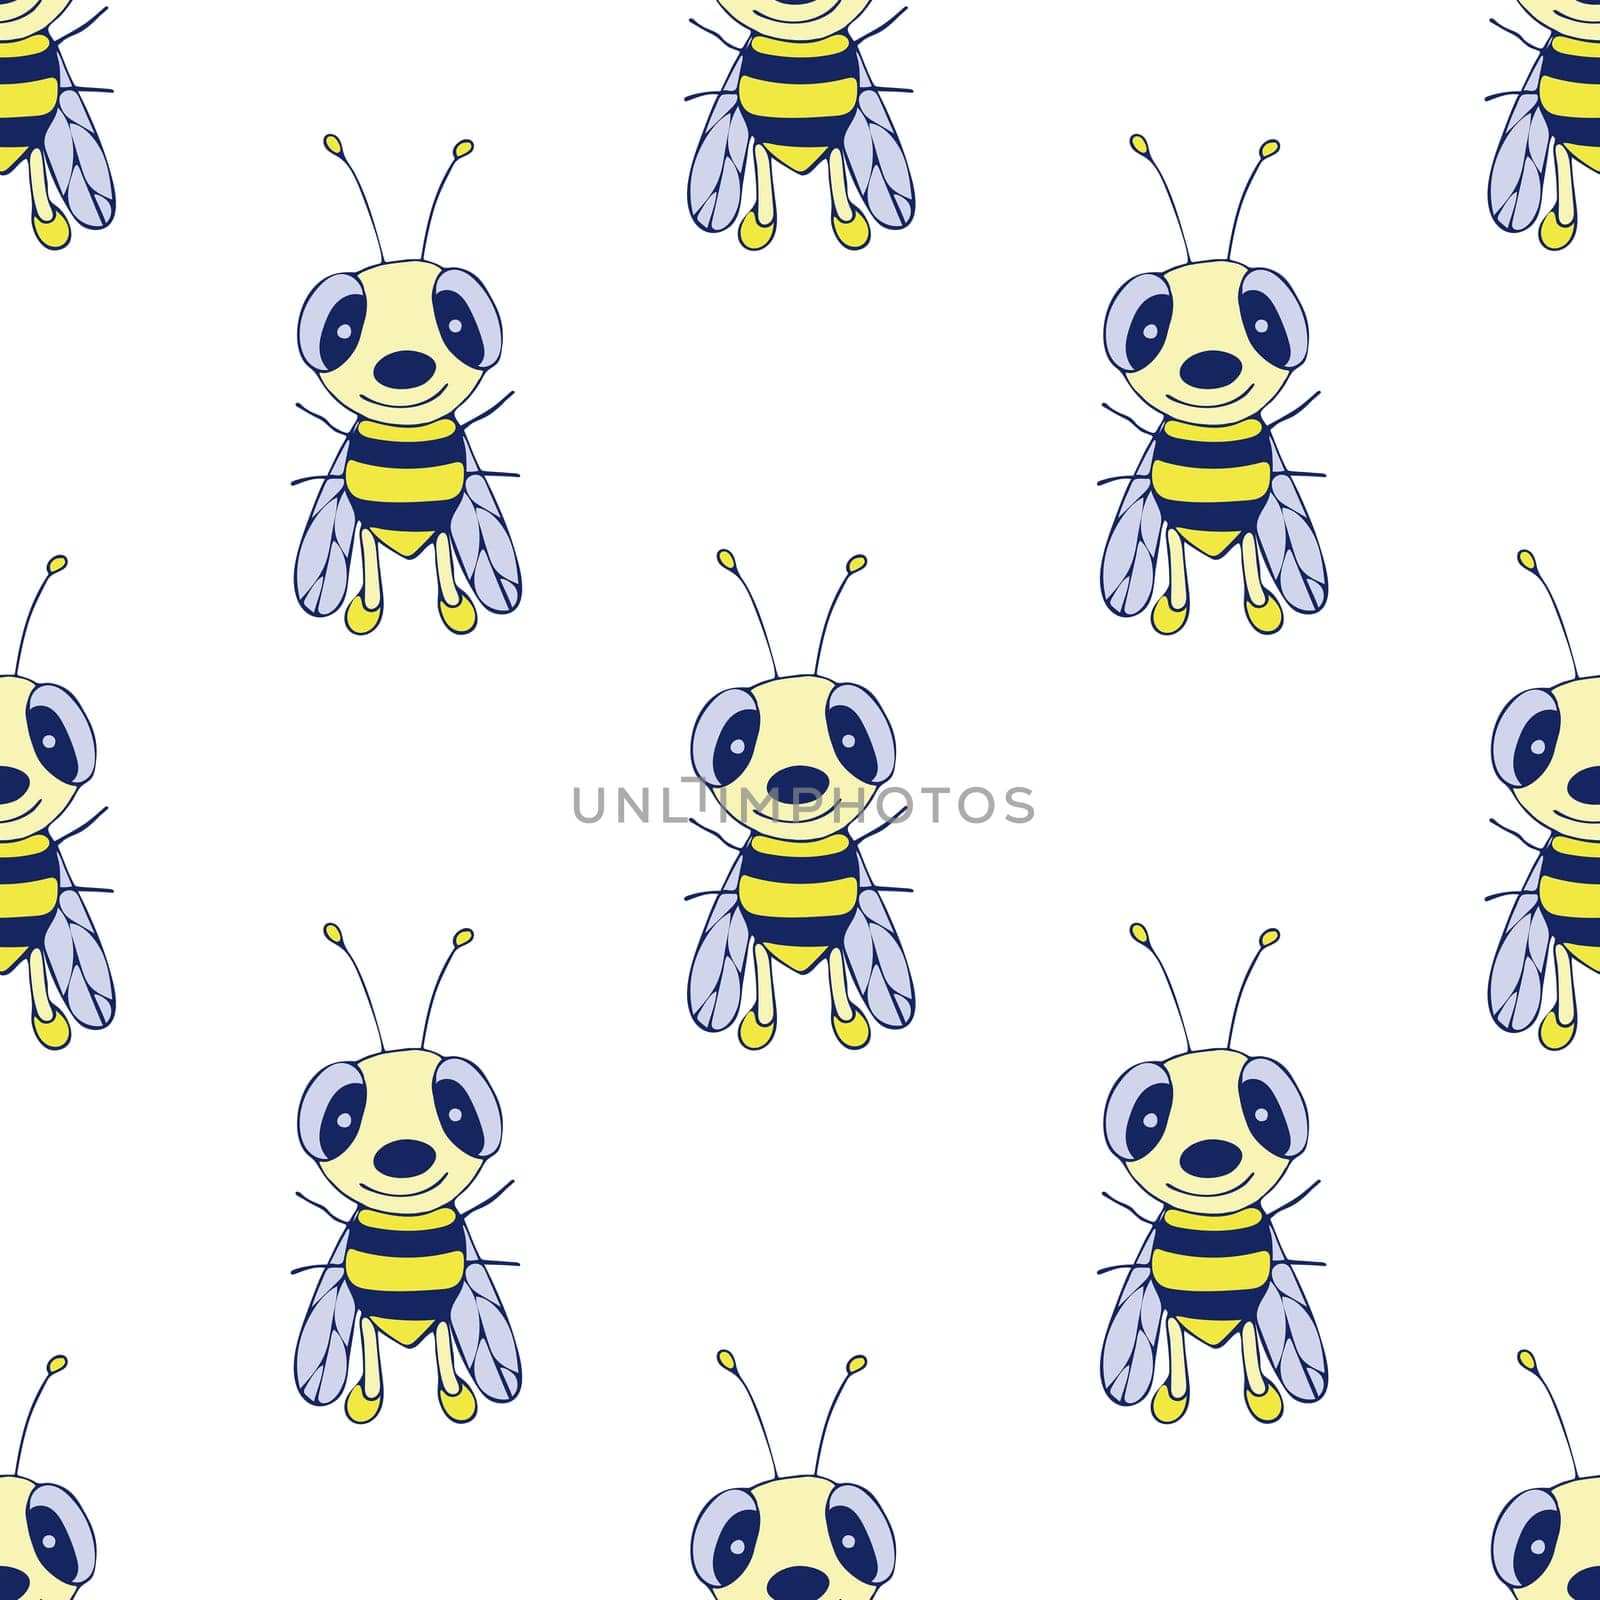 Cute Bee Seamless Pattern. Hand Drawn Digital Paper with Hand Drawn Wasp Illustration. Wallpaper with Cute Colorful Bumble Bee on White Background.